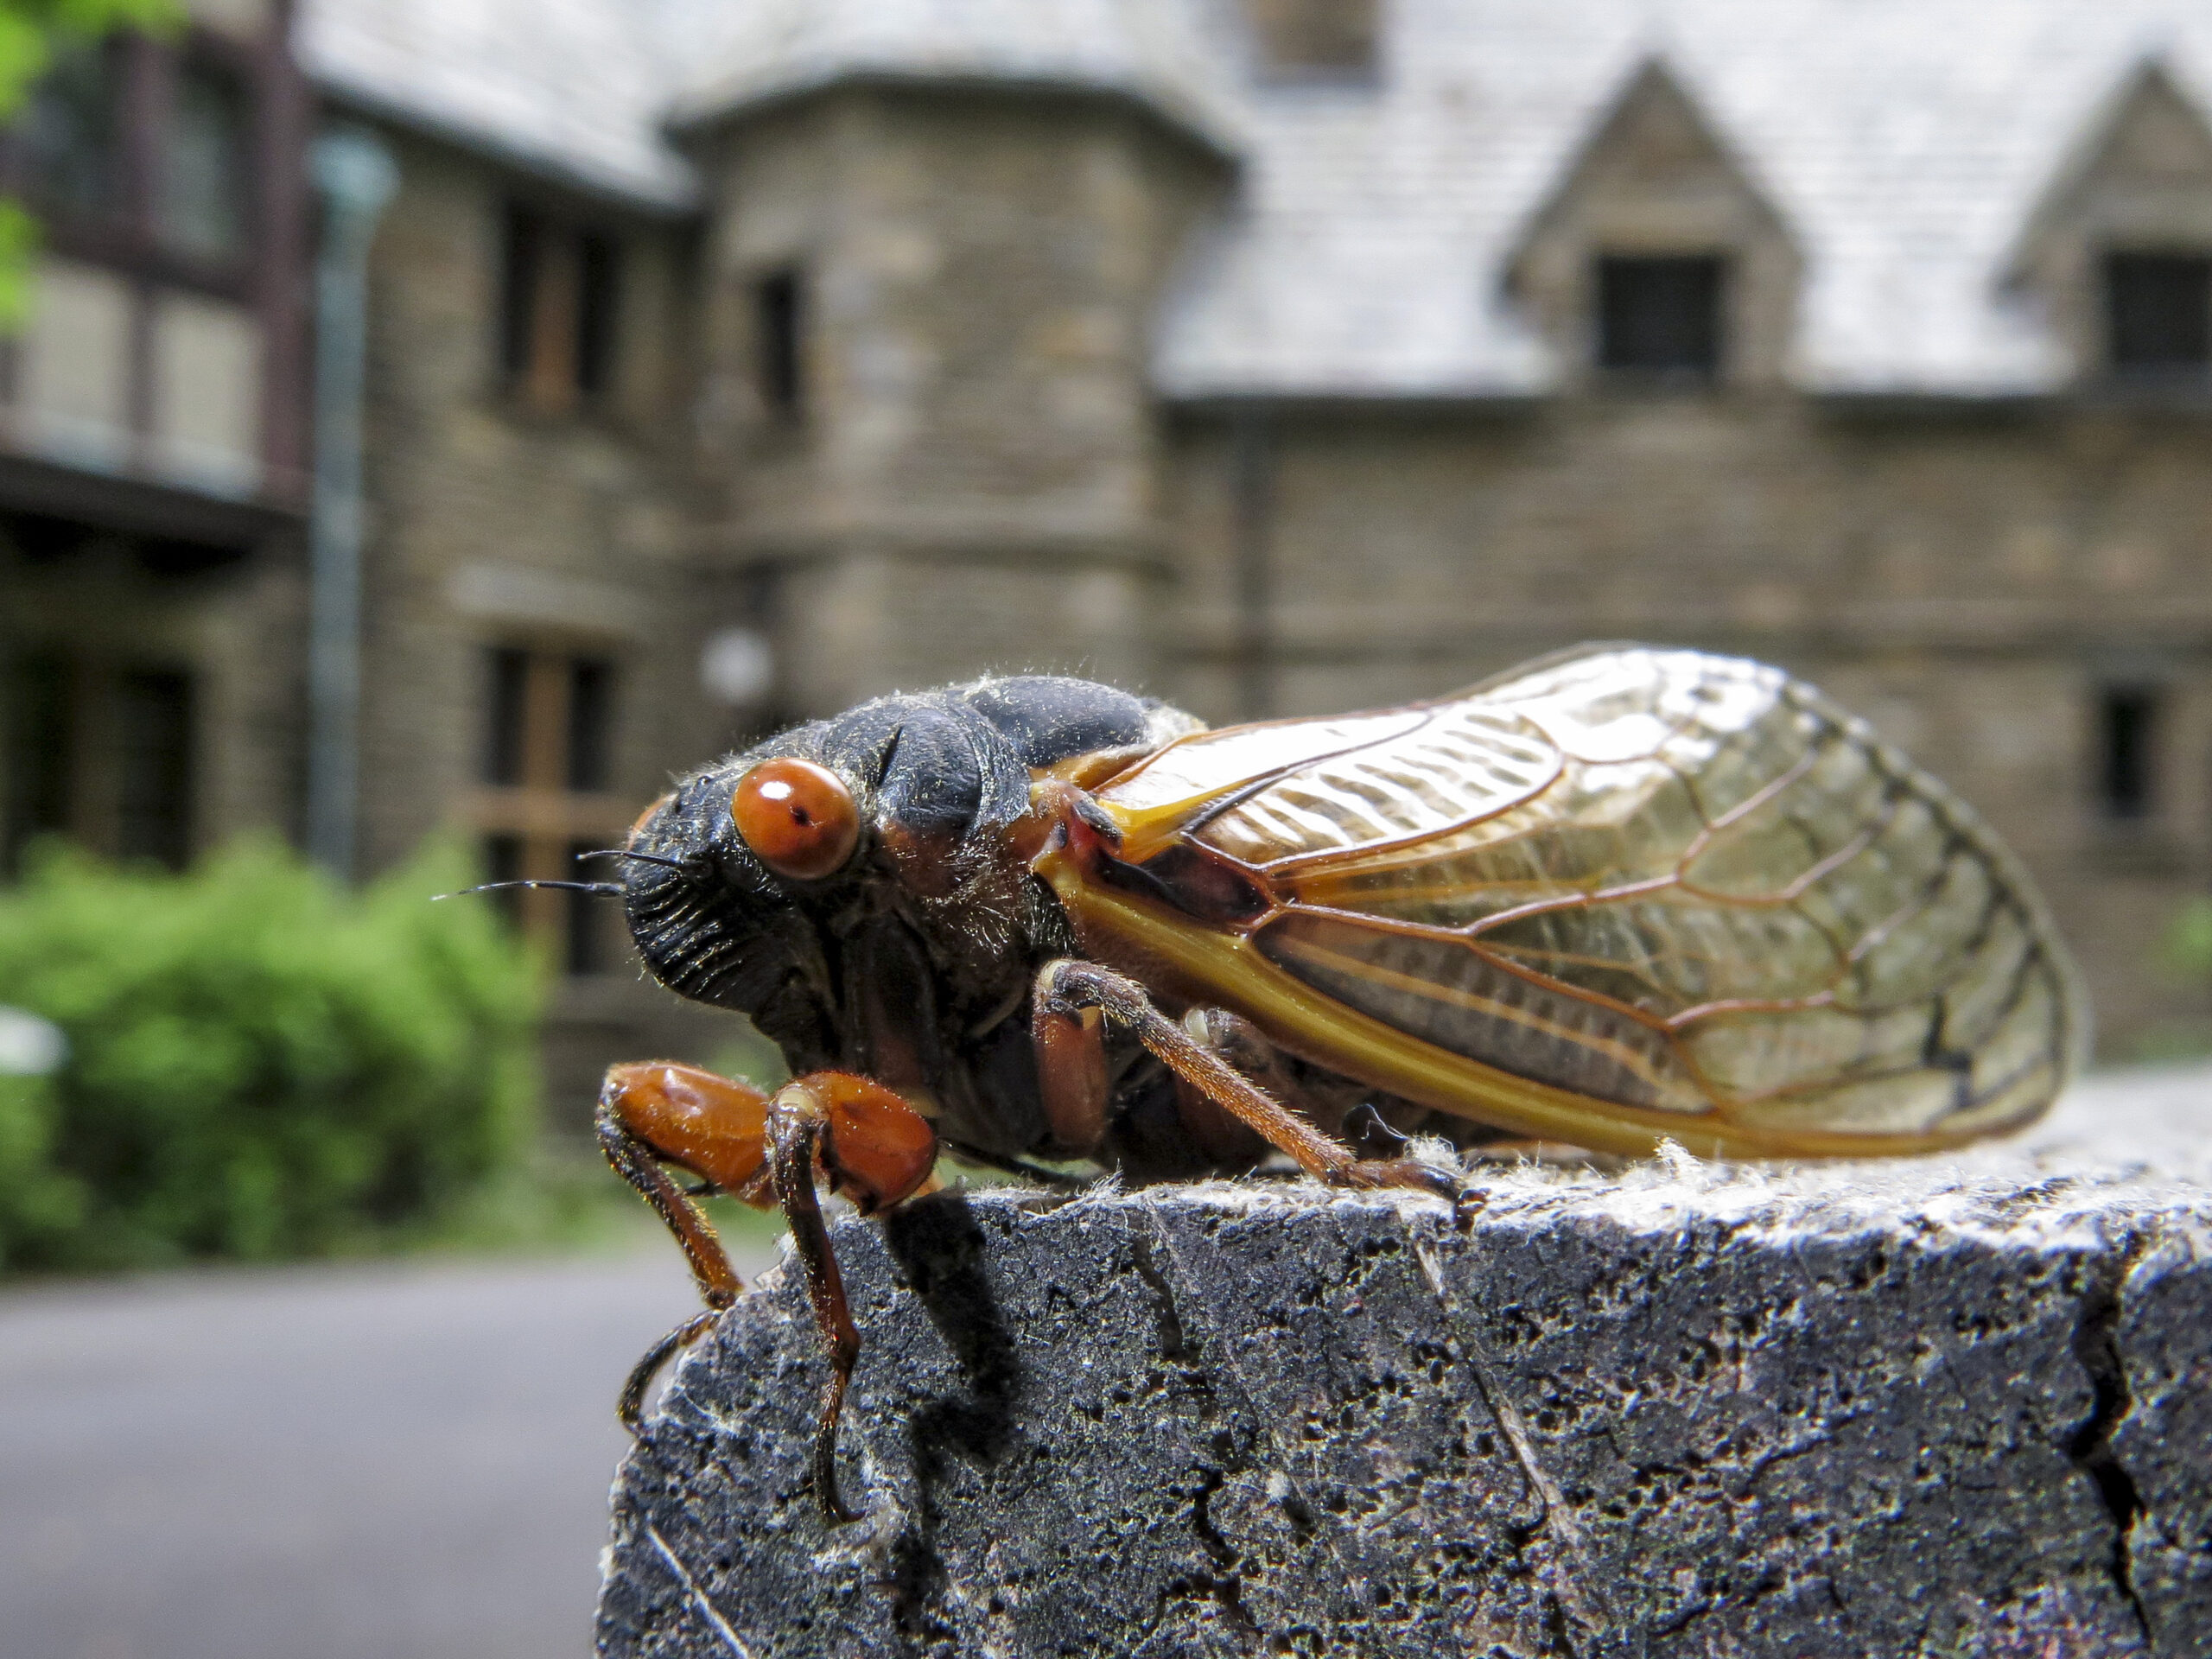 Scientists studied how cicadas pee. Their insights could shed light on fluid dynamics